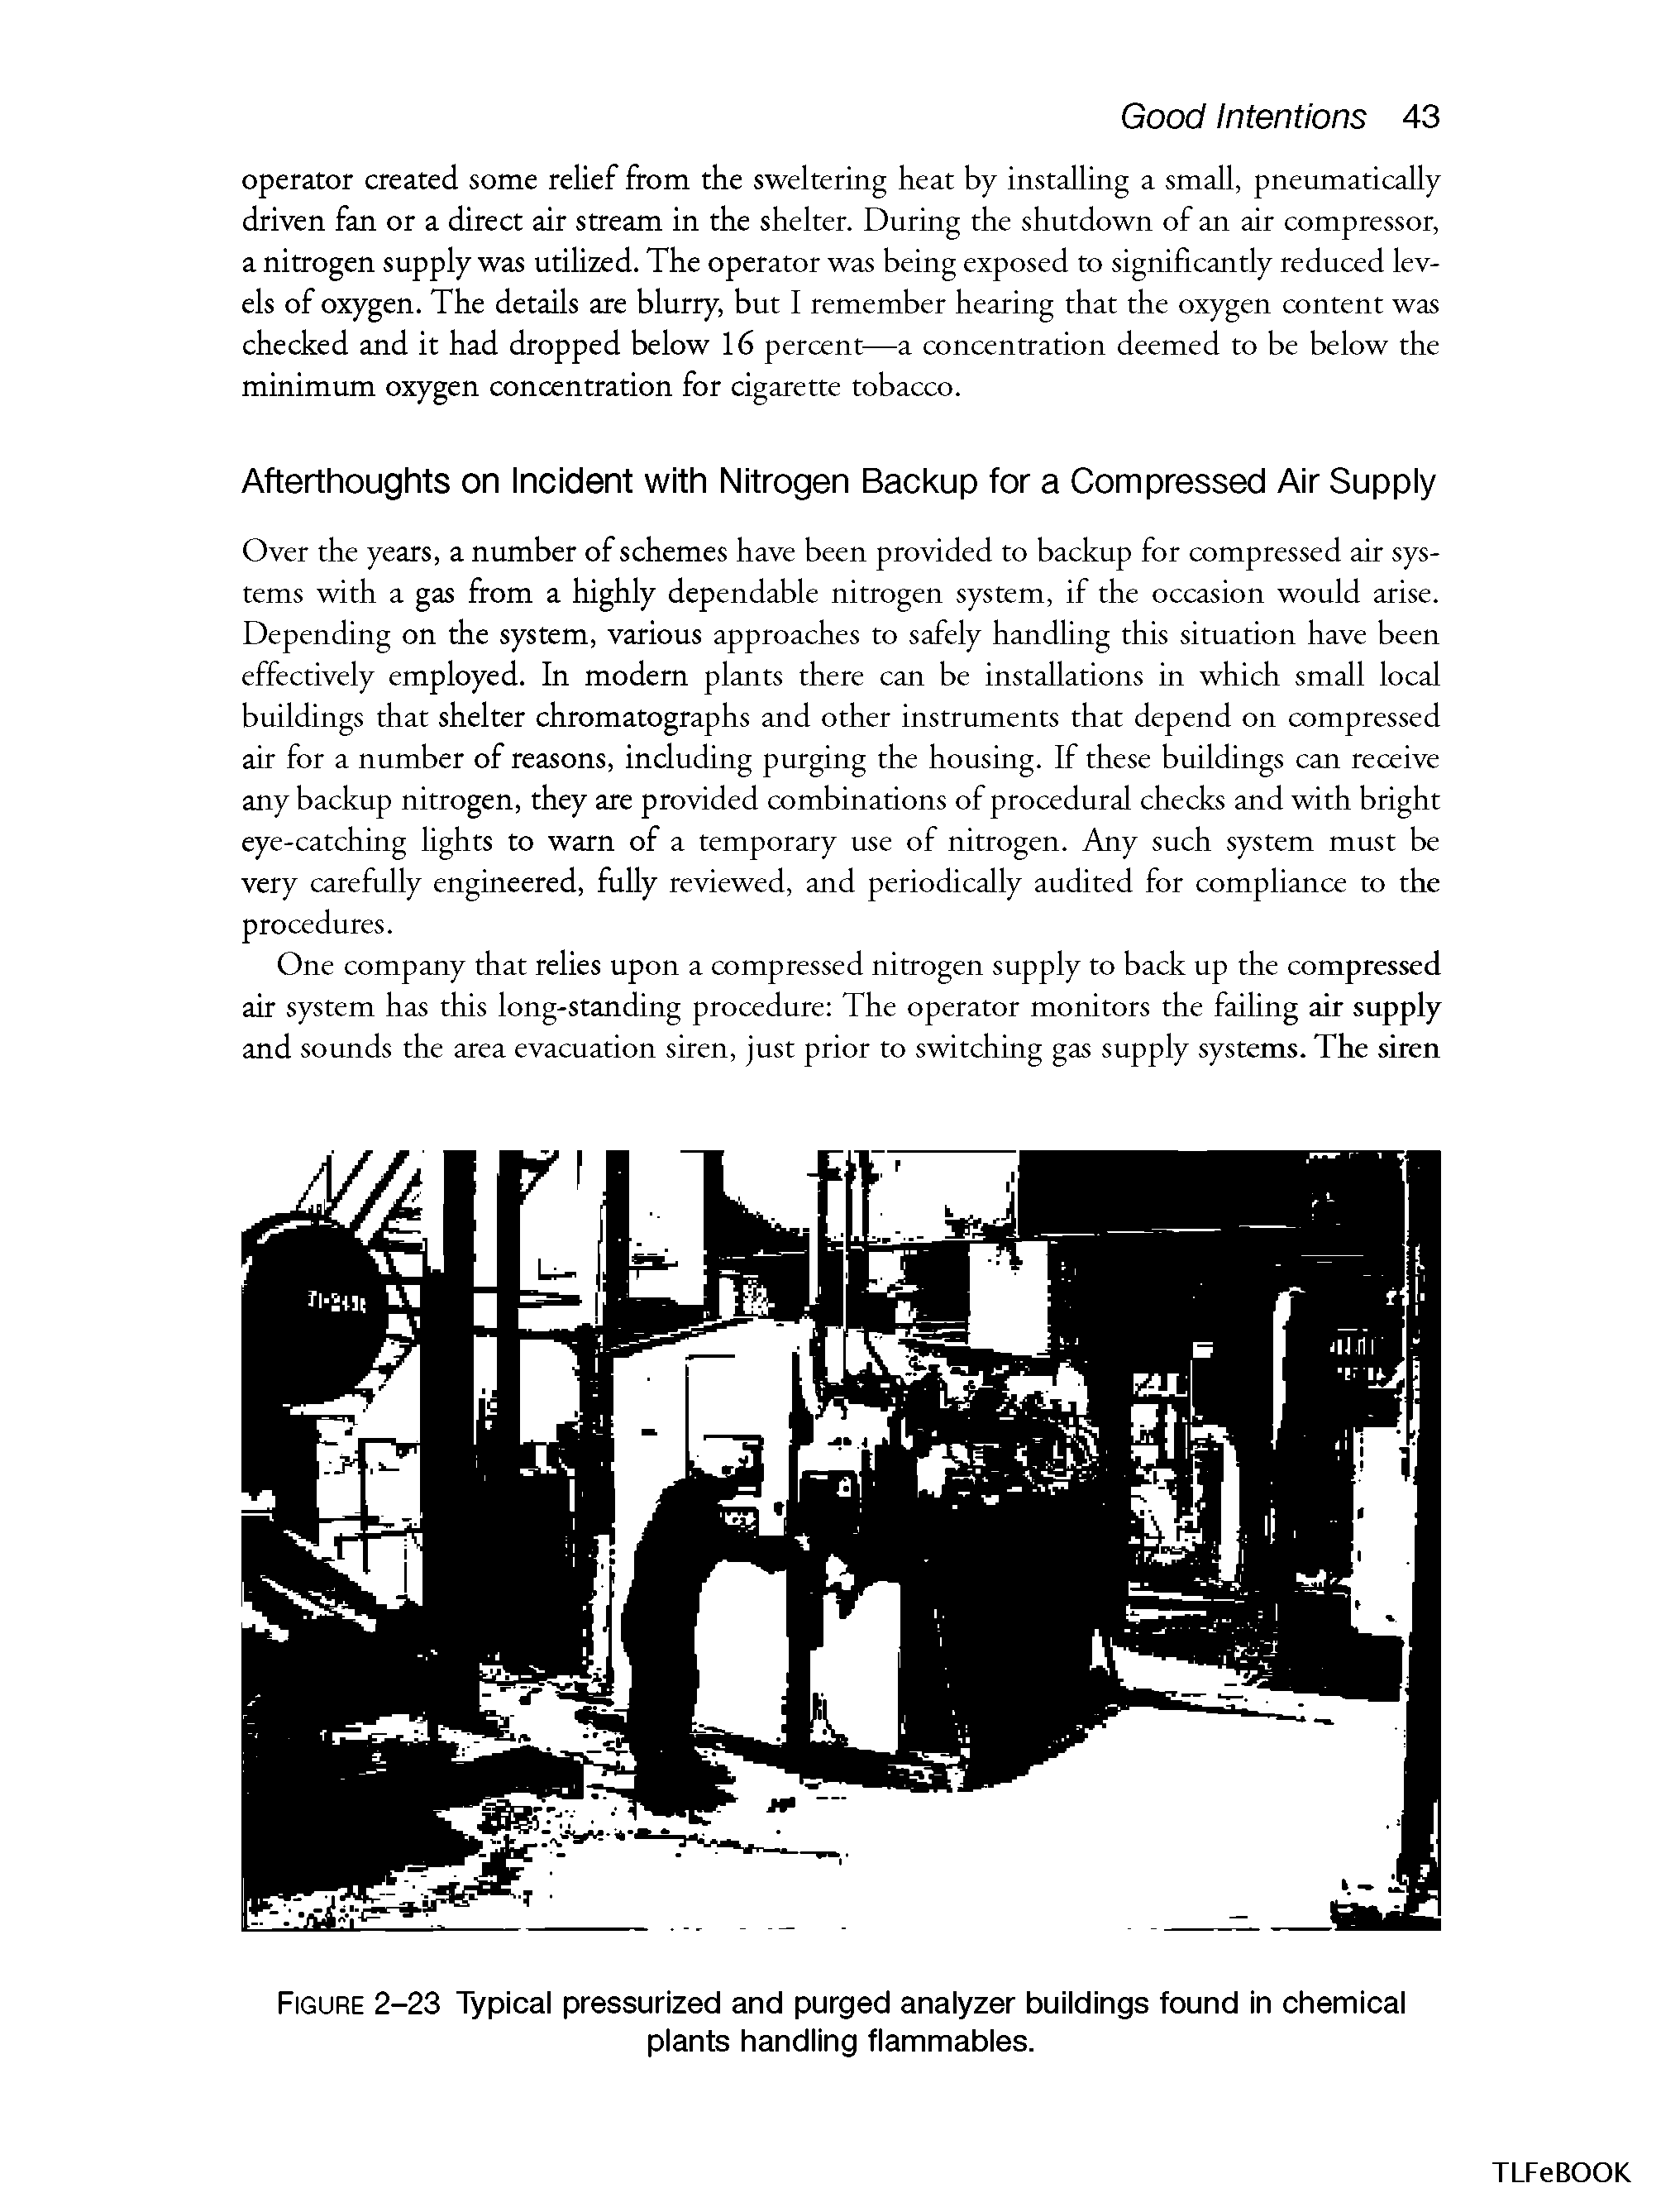 Figure 2-23 Typical pressurized and purged analyzer buildings found in chemical plants handling flammables.